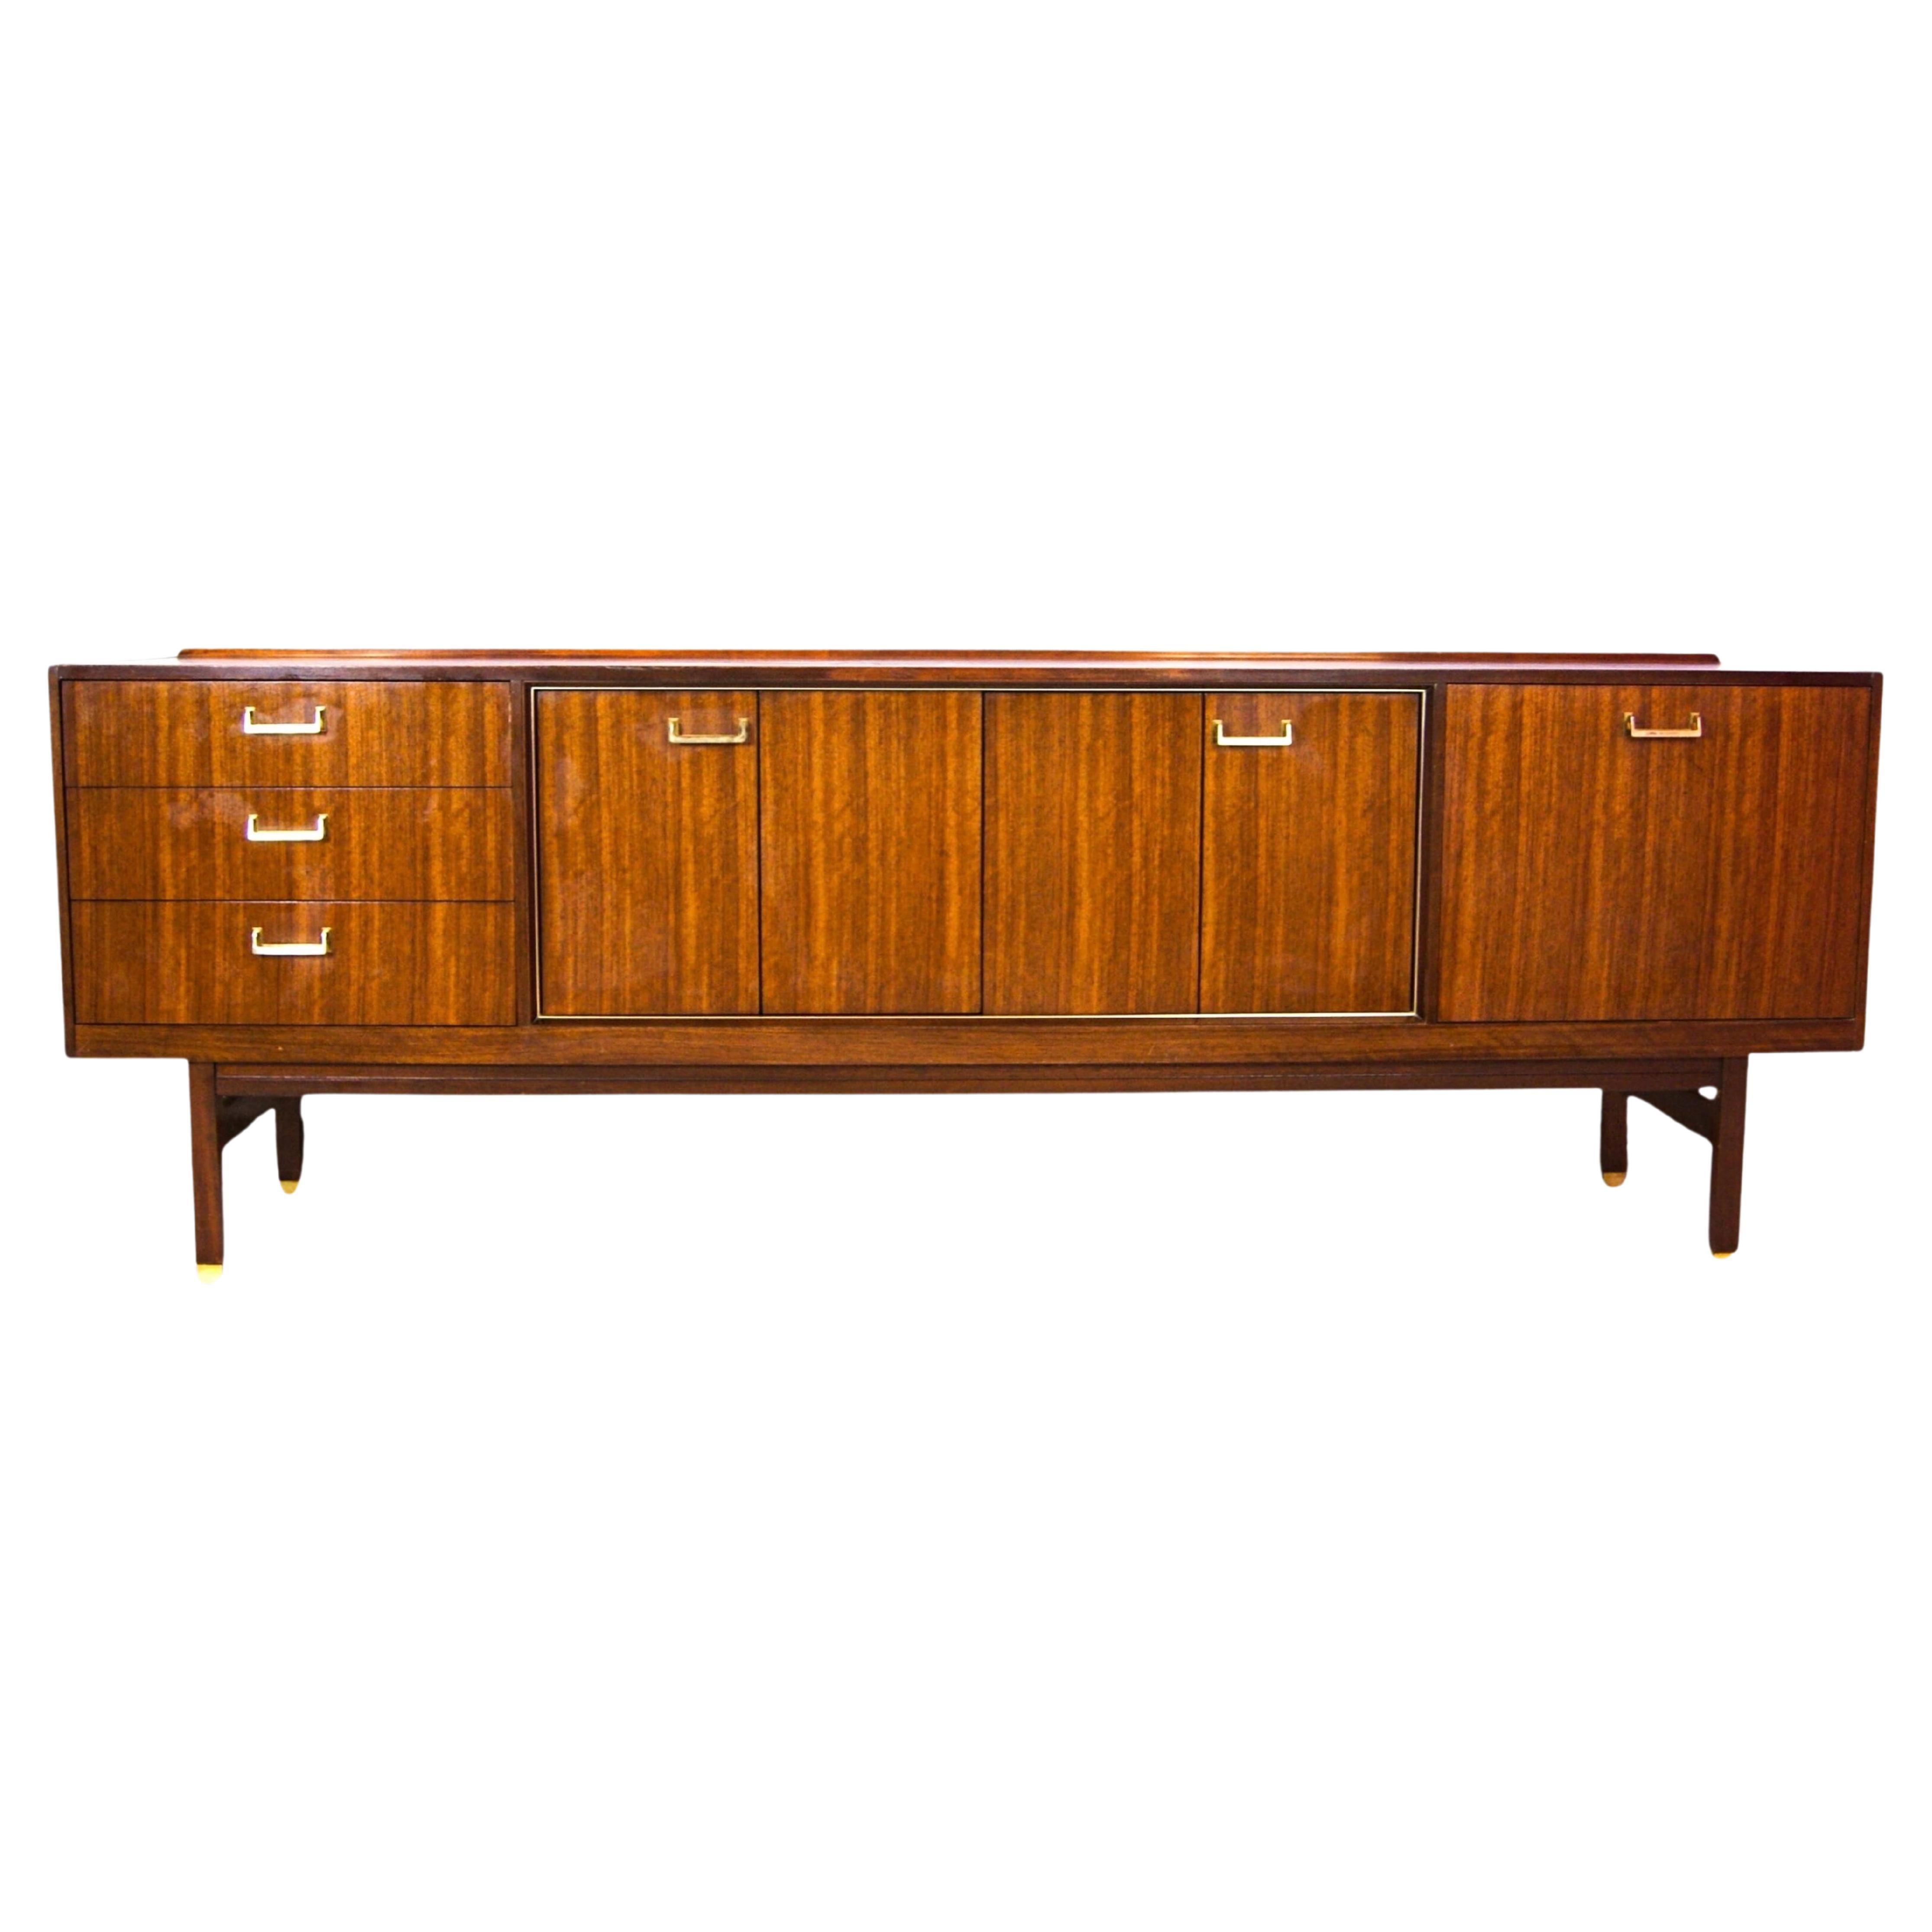 Retro 1950s Long Teak Sideboard by E Gomme With Brass Handles & Concertina Doors For Sale